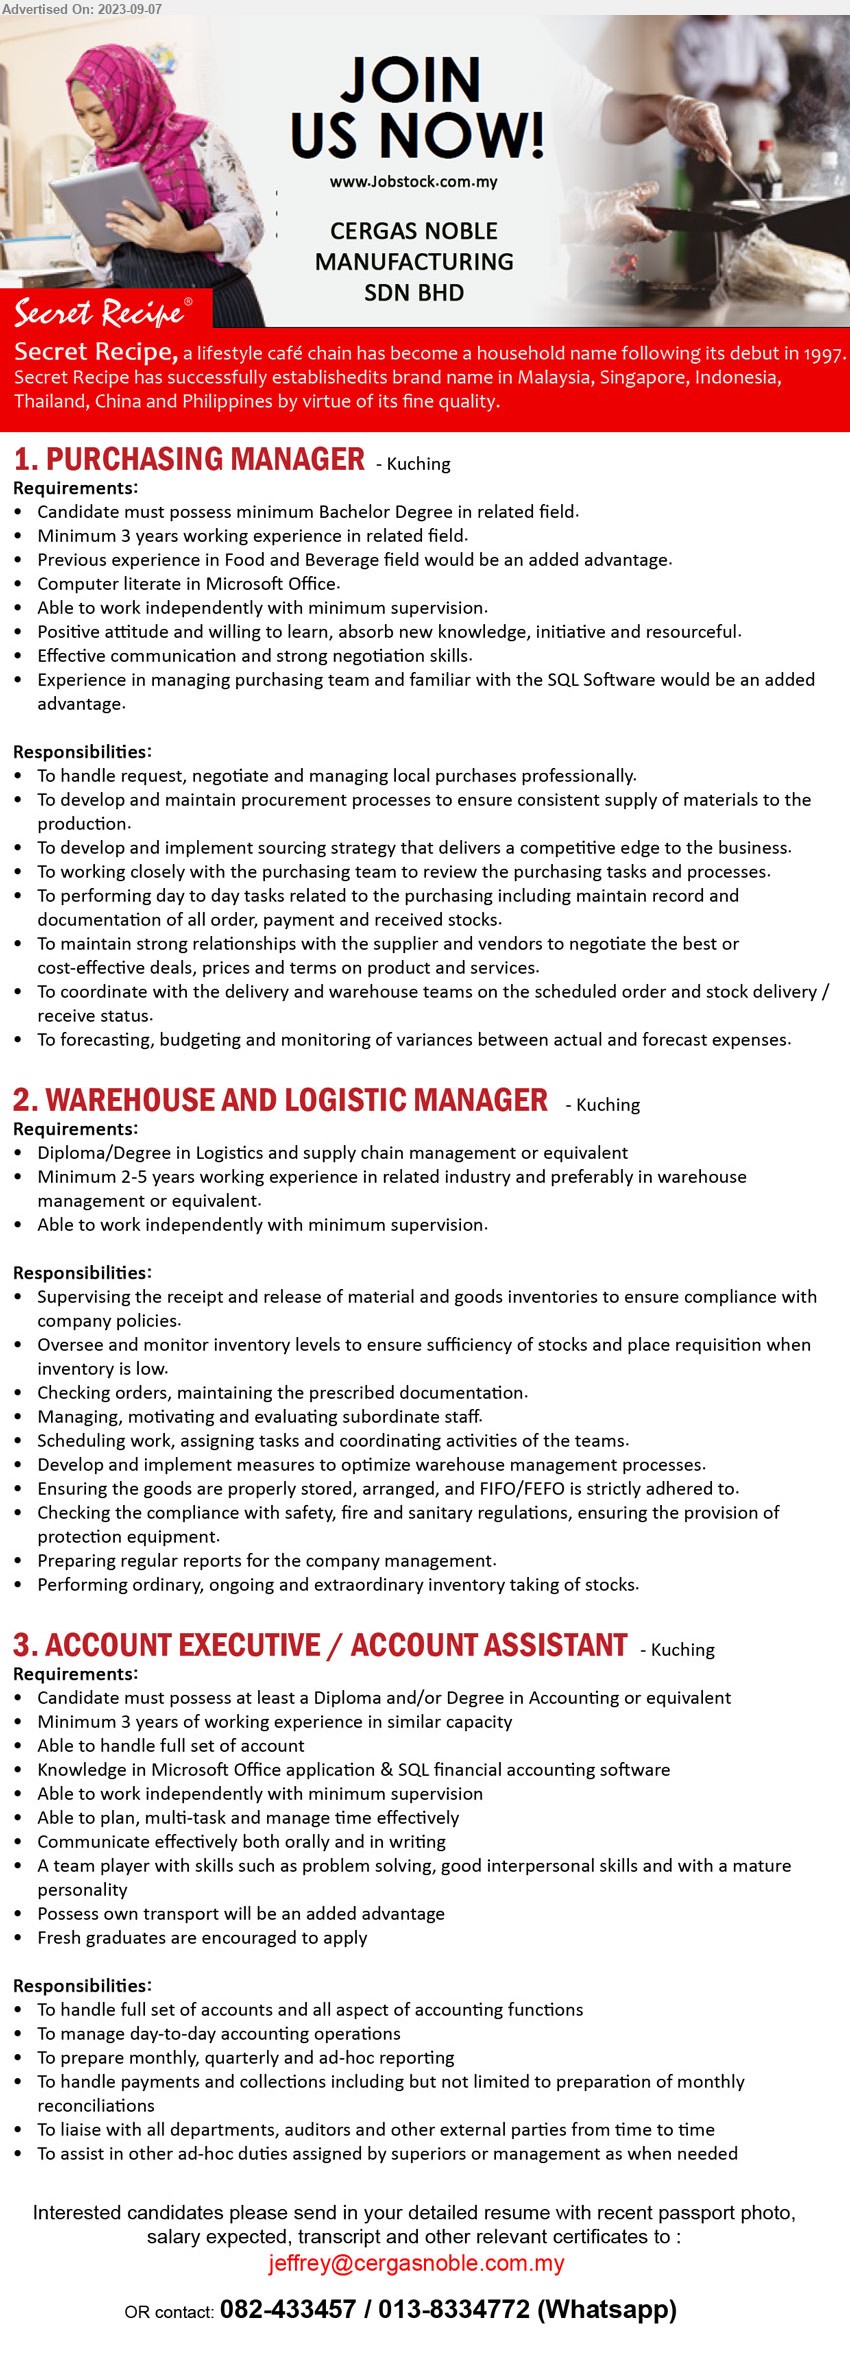 CERGAS NOBLE MANUFACTURING SDN BHD - 1. PURCHASING MANAGER (Kuching), Bachelor Degree, 3 yrs. exp.,Computer literate in Microsoft Office,...
2. WAREHOUSE AND LOGISTIC MANAGER (Kuching), Diploma/Degree in Logistics and supply chain management,...
3. ACCOUNT EXECUTIVE / ACCOUNT ASSISTANT (Kuching), Diploma and/or Degree in Accounting, 3 yrs. exp.,...
082-433457 / 013-8334772 (Whatsapp) / Email resume to ...